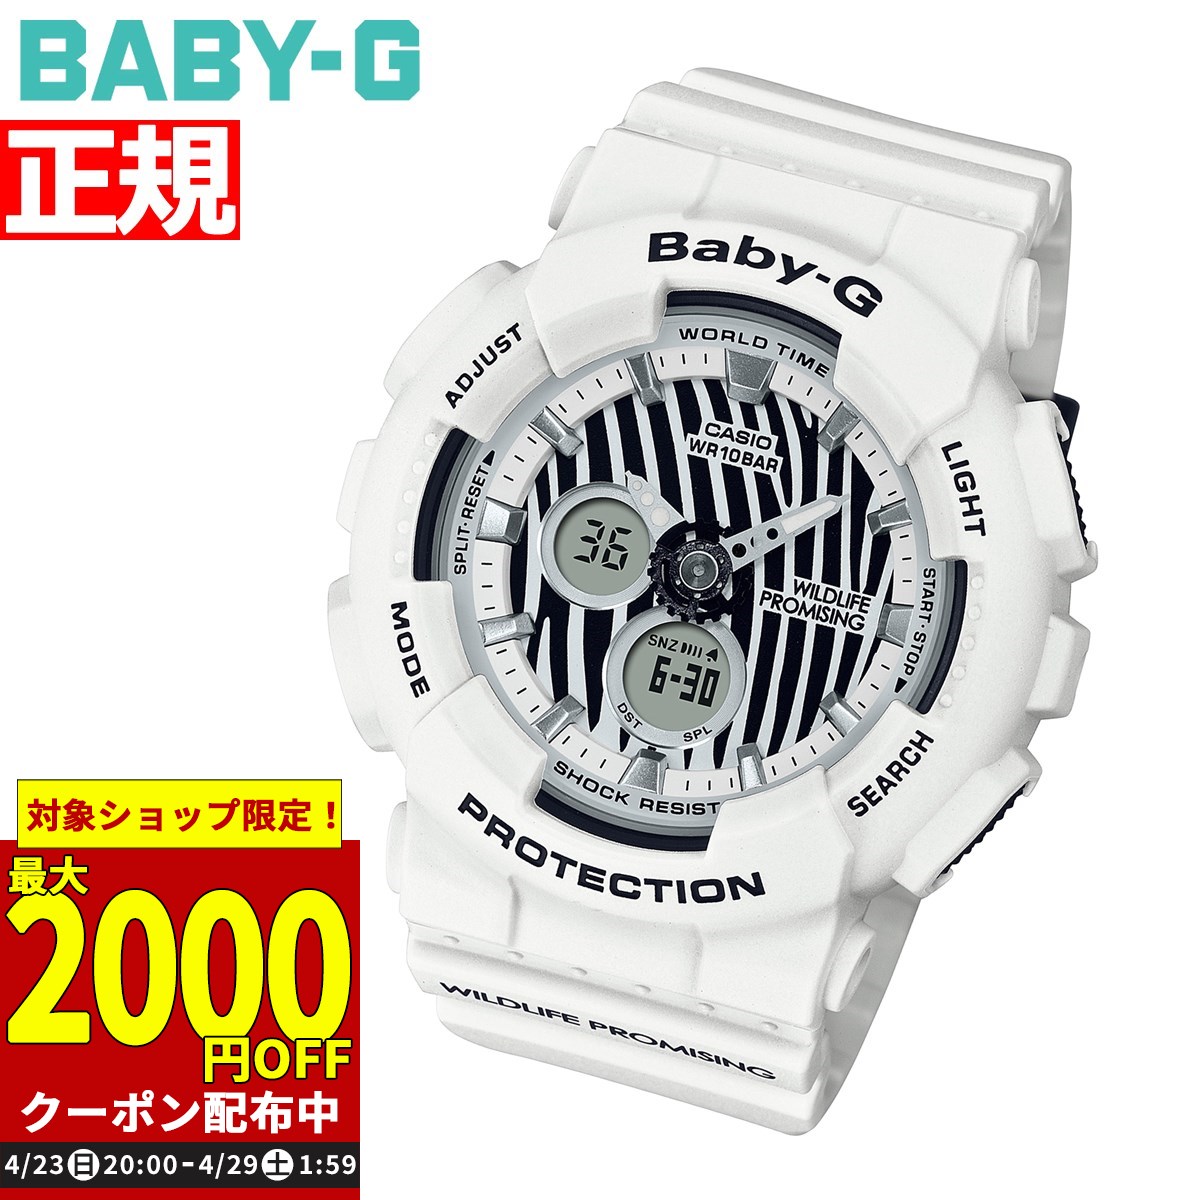 BABY-G baby G Lady's WILDLIFE PROMISING collaboration watch BA